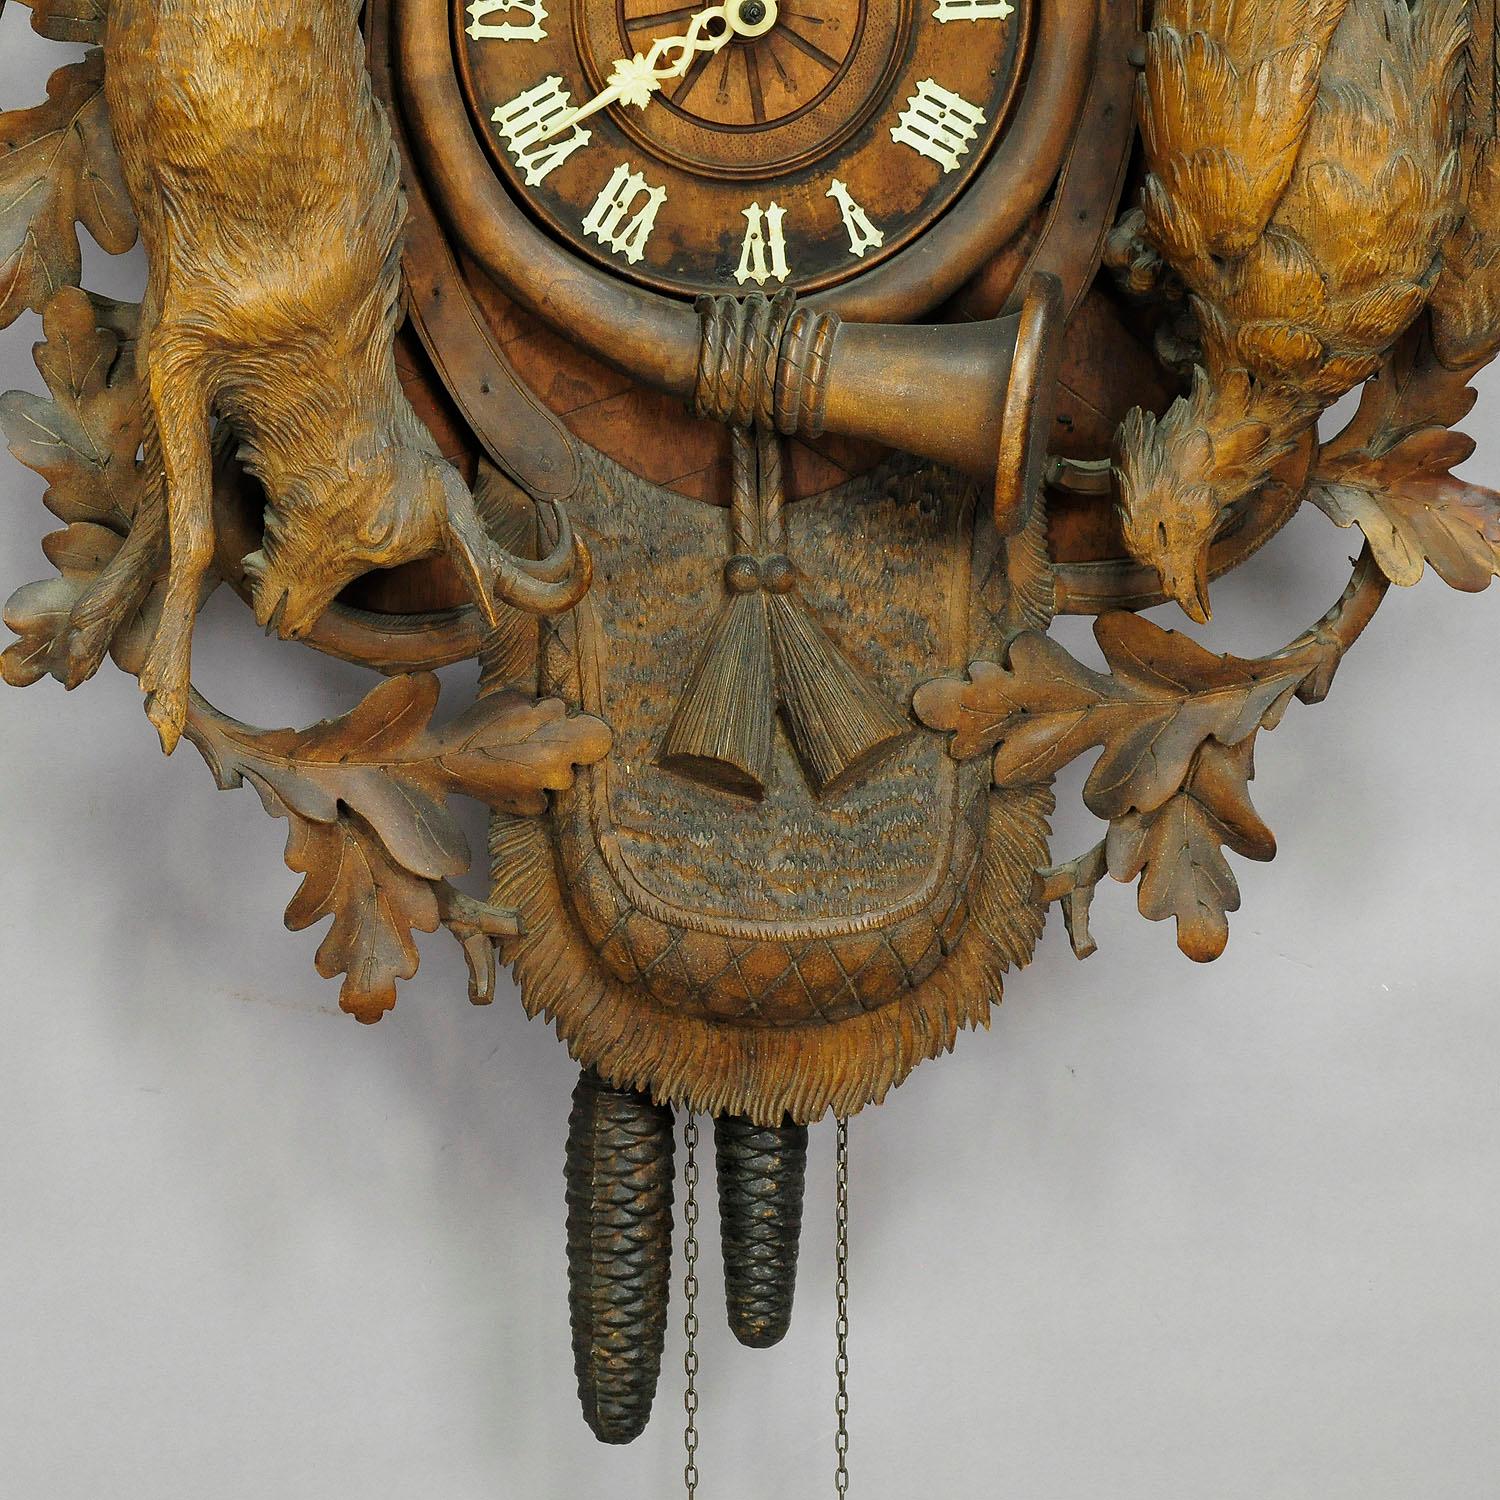 A great detailed hand carved wooden cuckoo clock, decorated with hunting accessories, oak leaves, hare, pheasant and a stag head on top. Black Forest, Germany, circa 1900. Clockwork in working condition, overworked by a clockmaker.
Measures:
Width